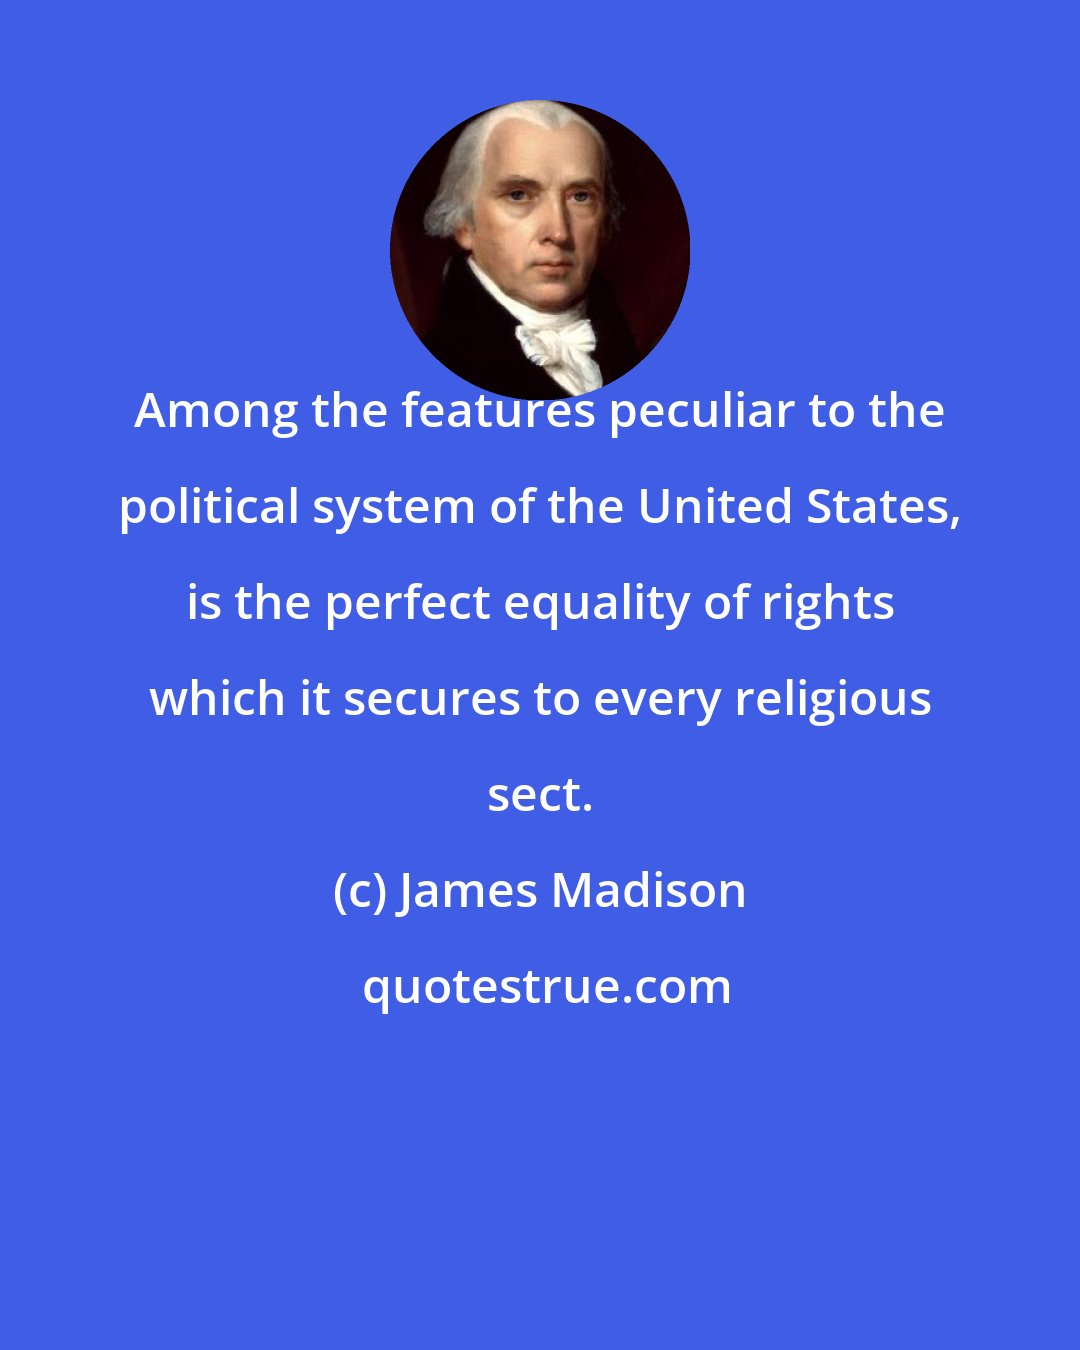 James Madison: Among the features peculiar to the political system of the United States, is the perfect equality of rights which it secures to every religious sect.